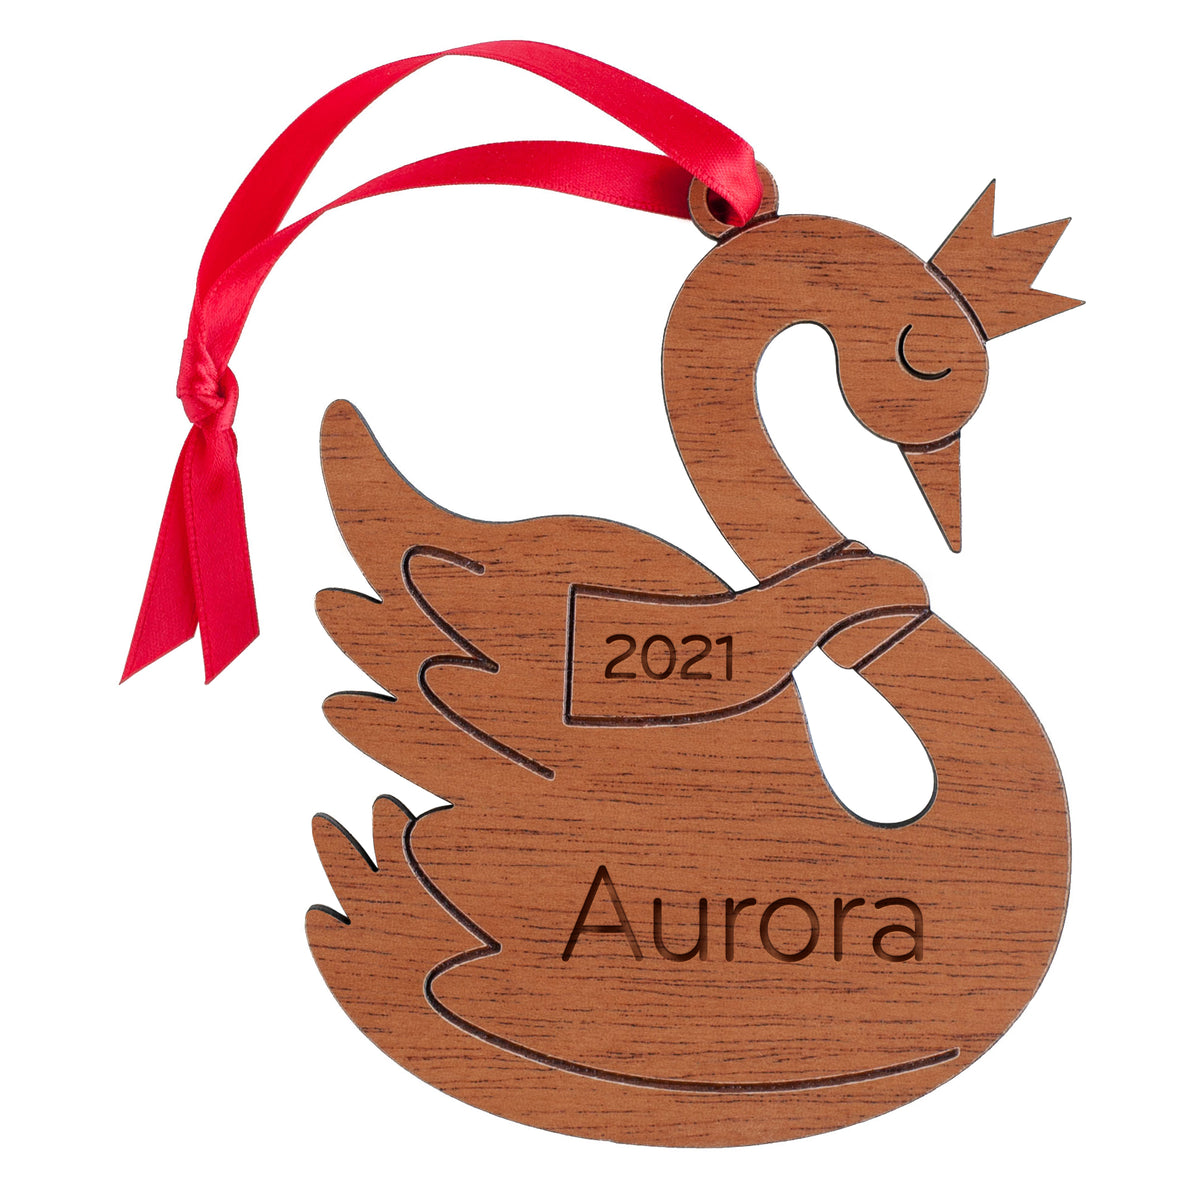 Swan Wooden Christmas Ornament - Personalized